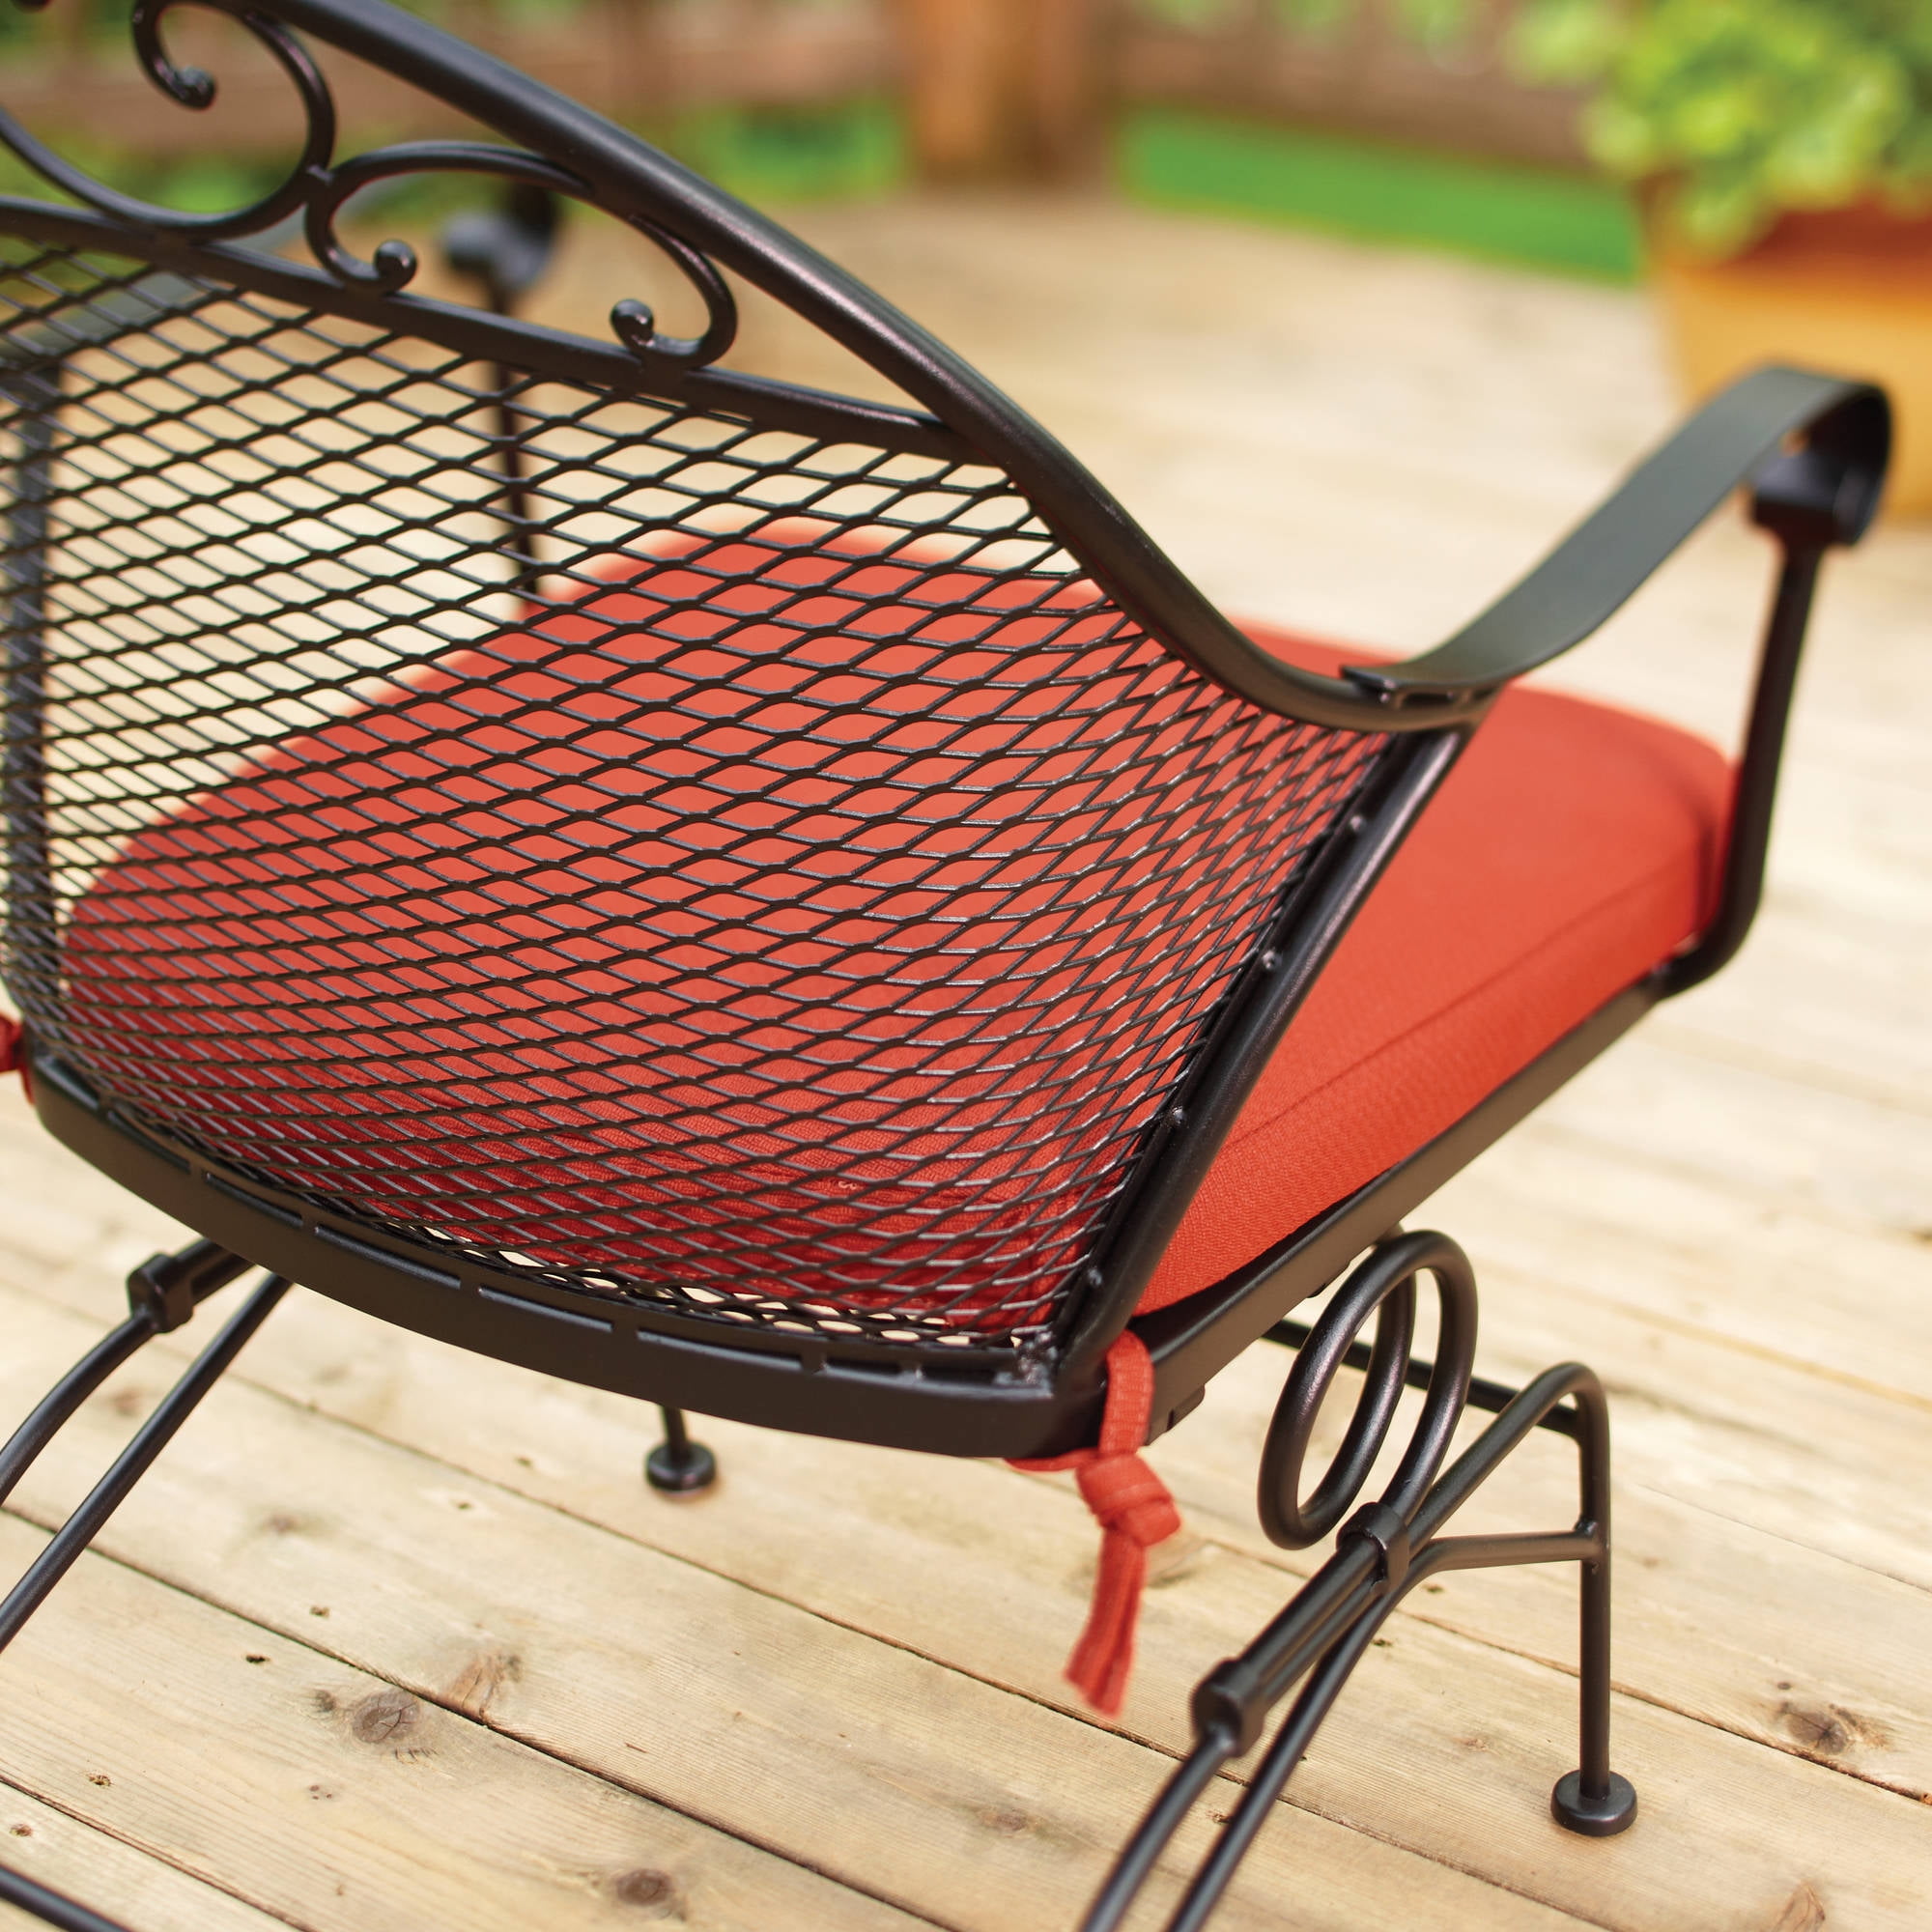 How To Clean Wrought Iron Patio Furniture Home Design Ideas